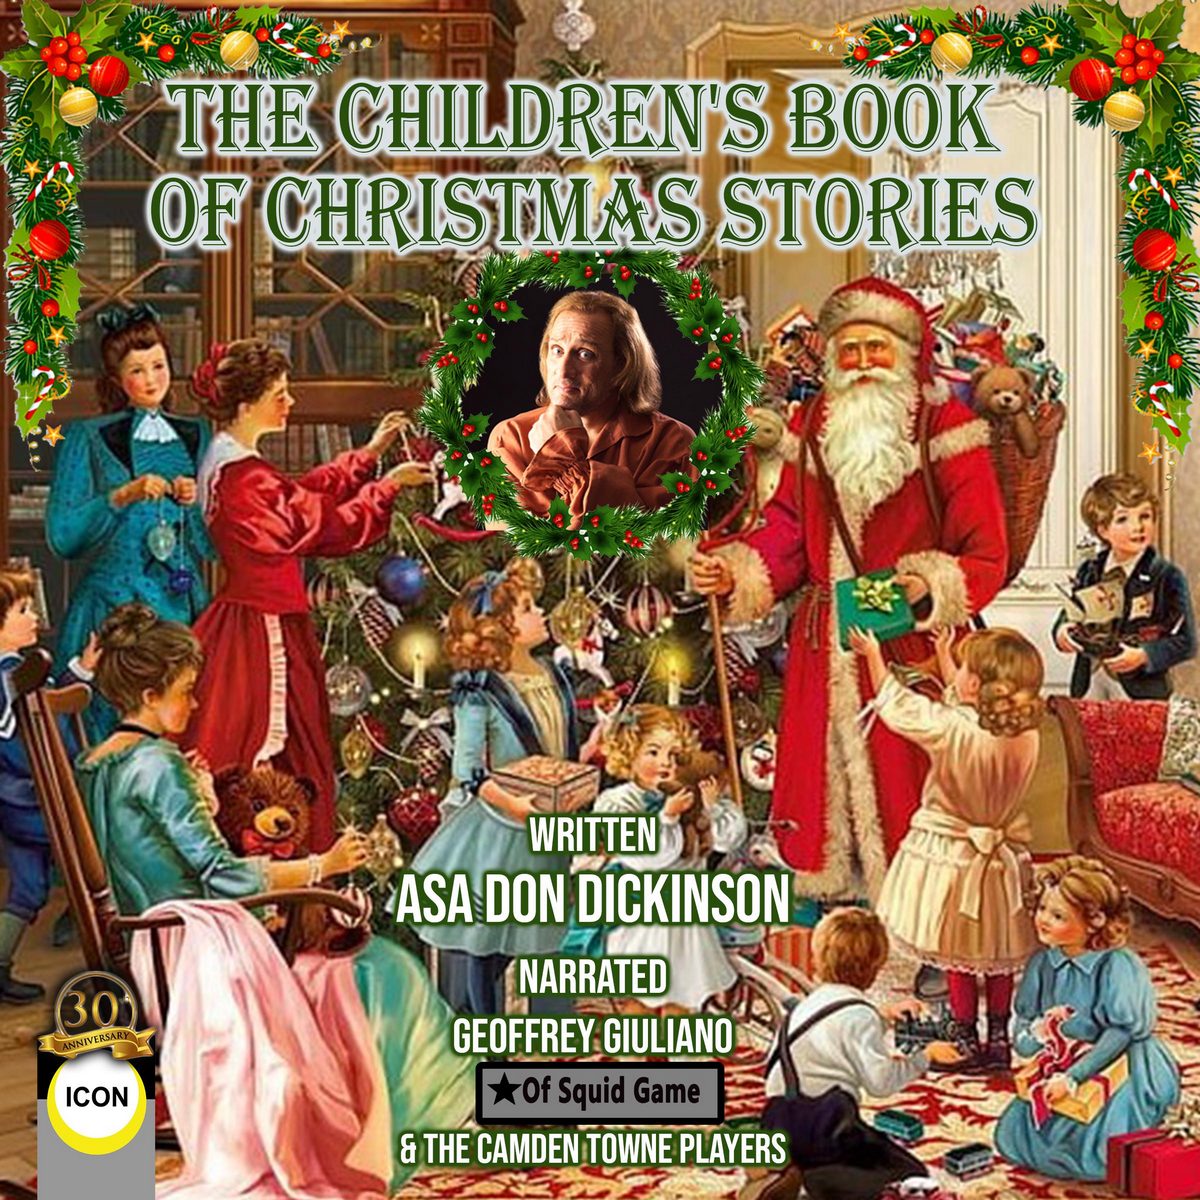 The Children’s Book of Christmas Stories